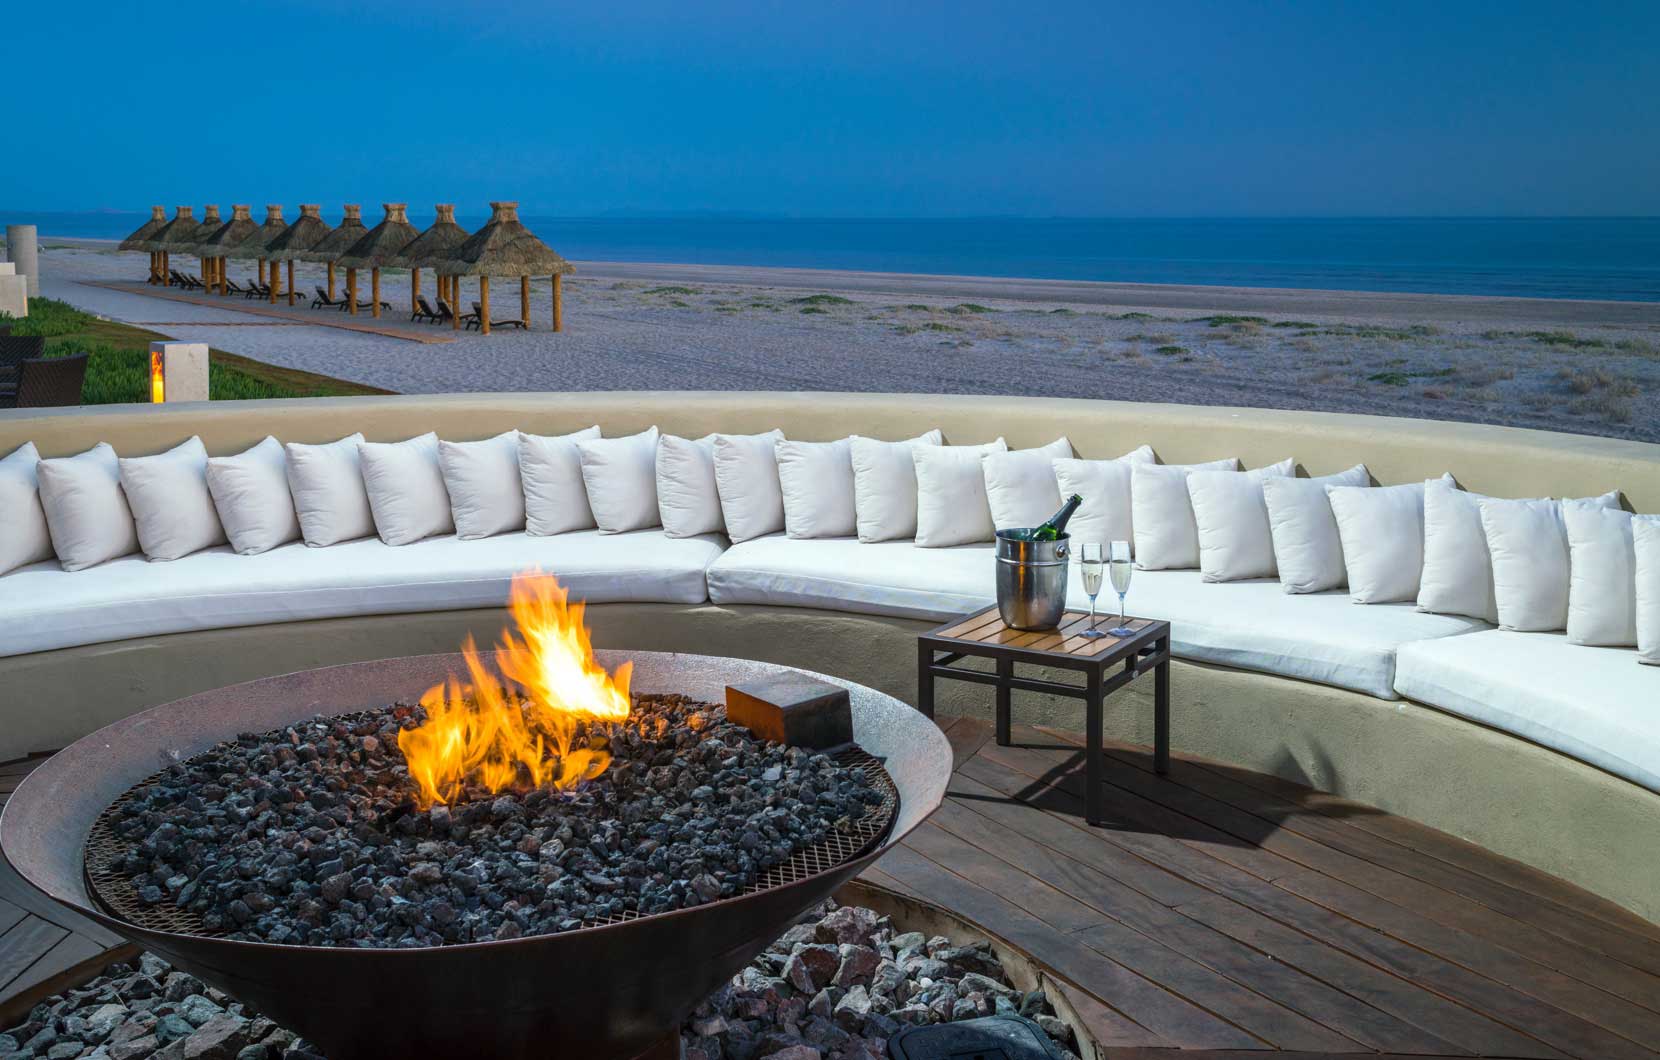 After dinner, share a glass of champagne at one of Puerto Peñasco's romantic fire pits.